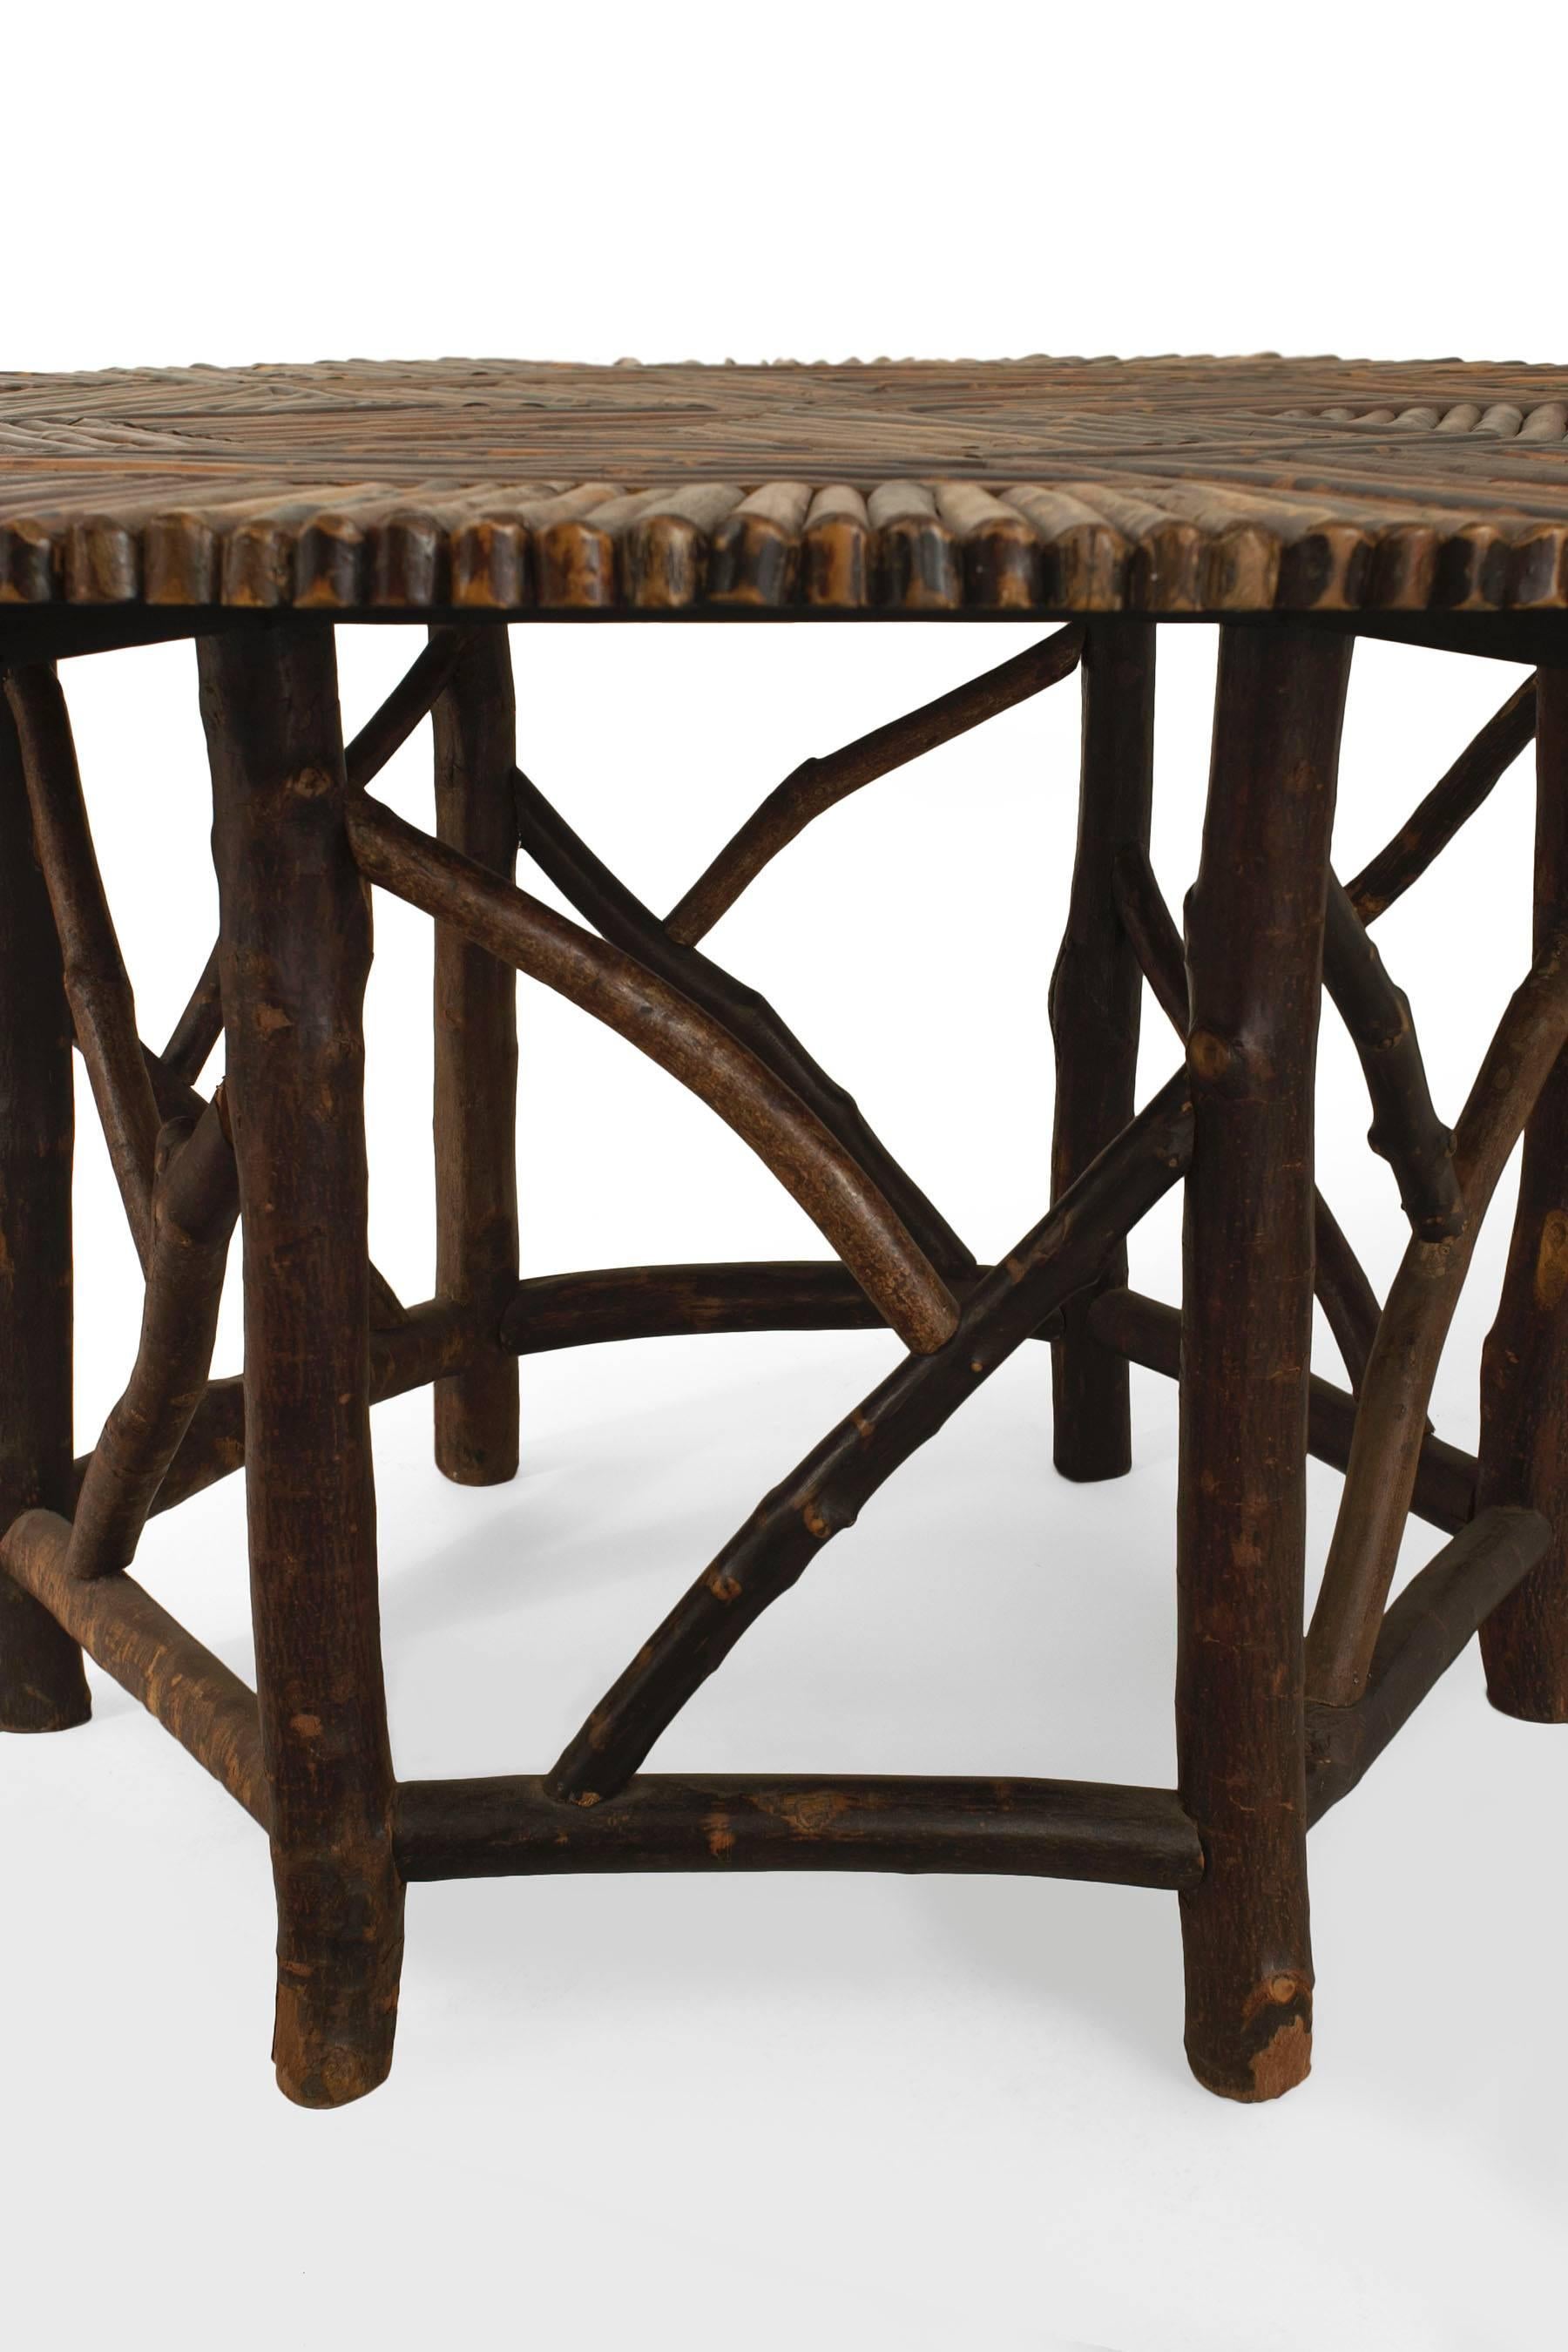 20th Century American Adirondack Style Round Twig Dining Table